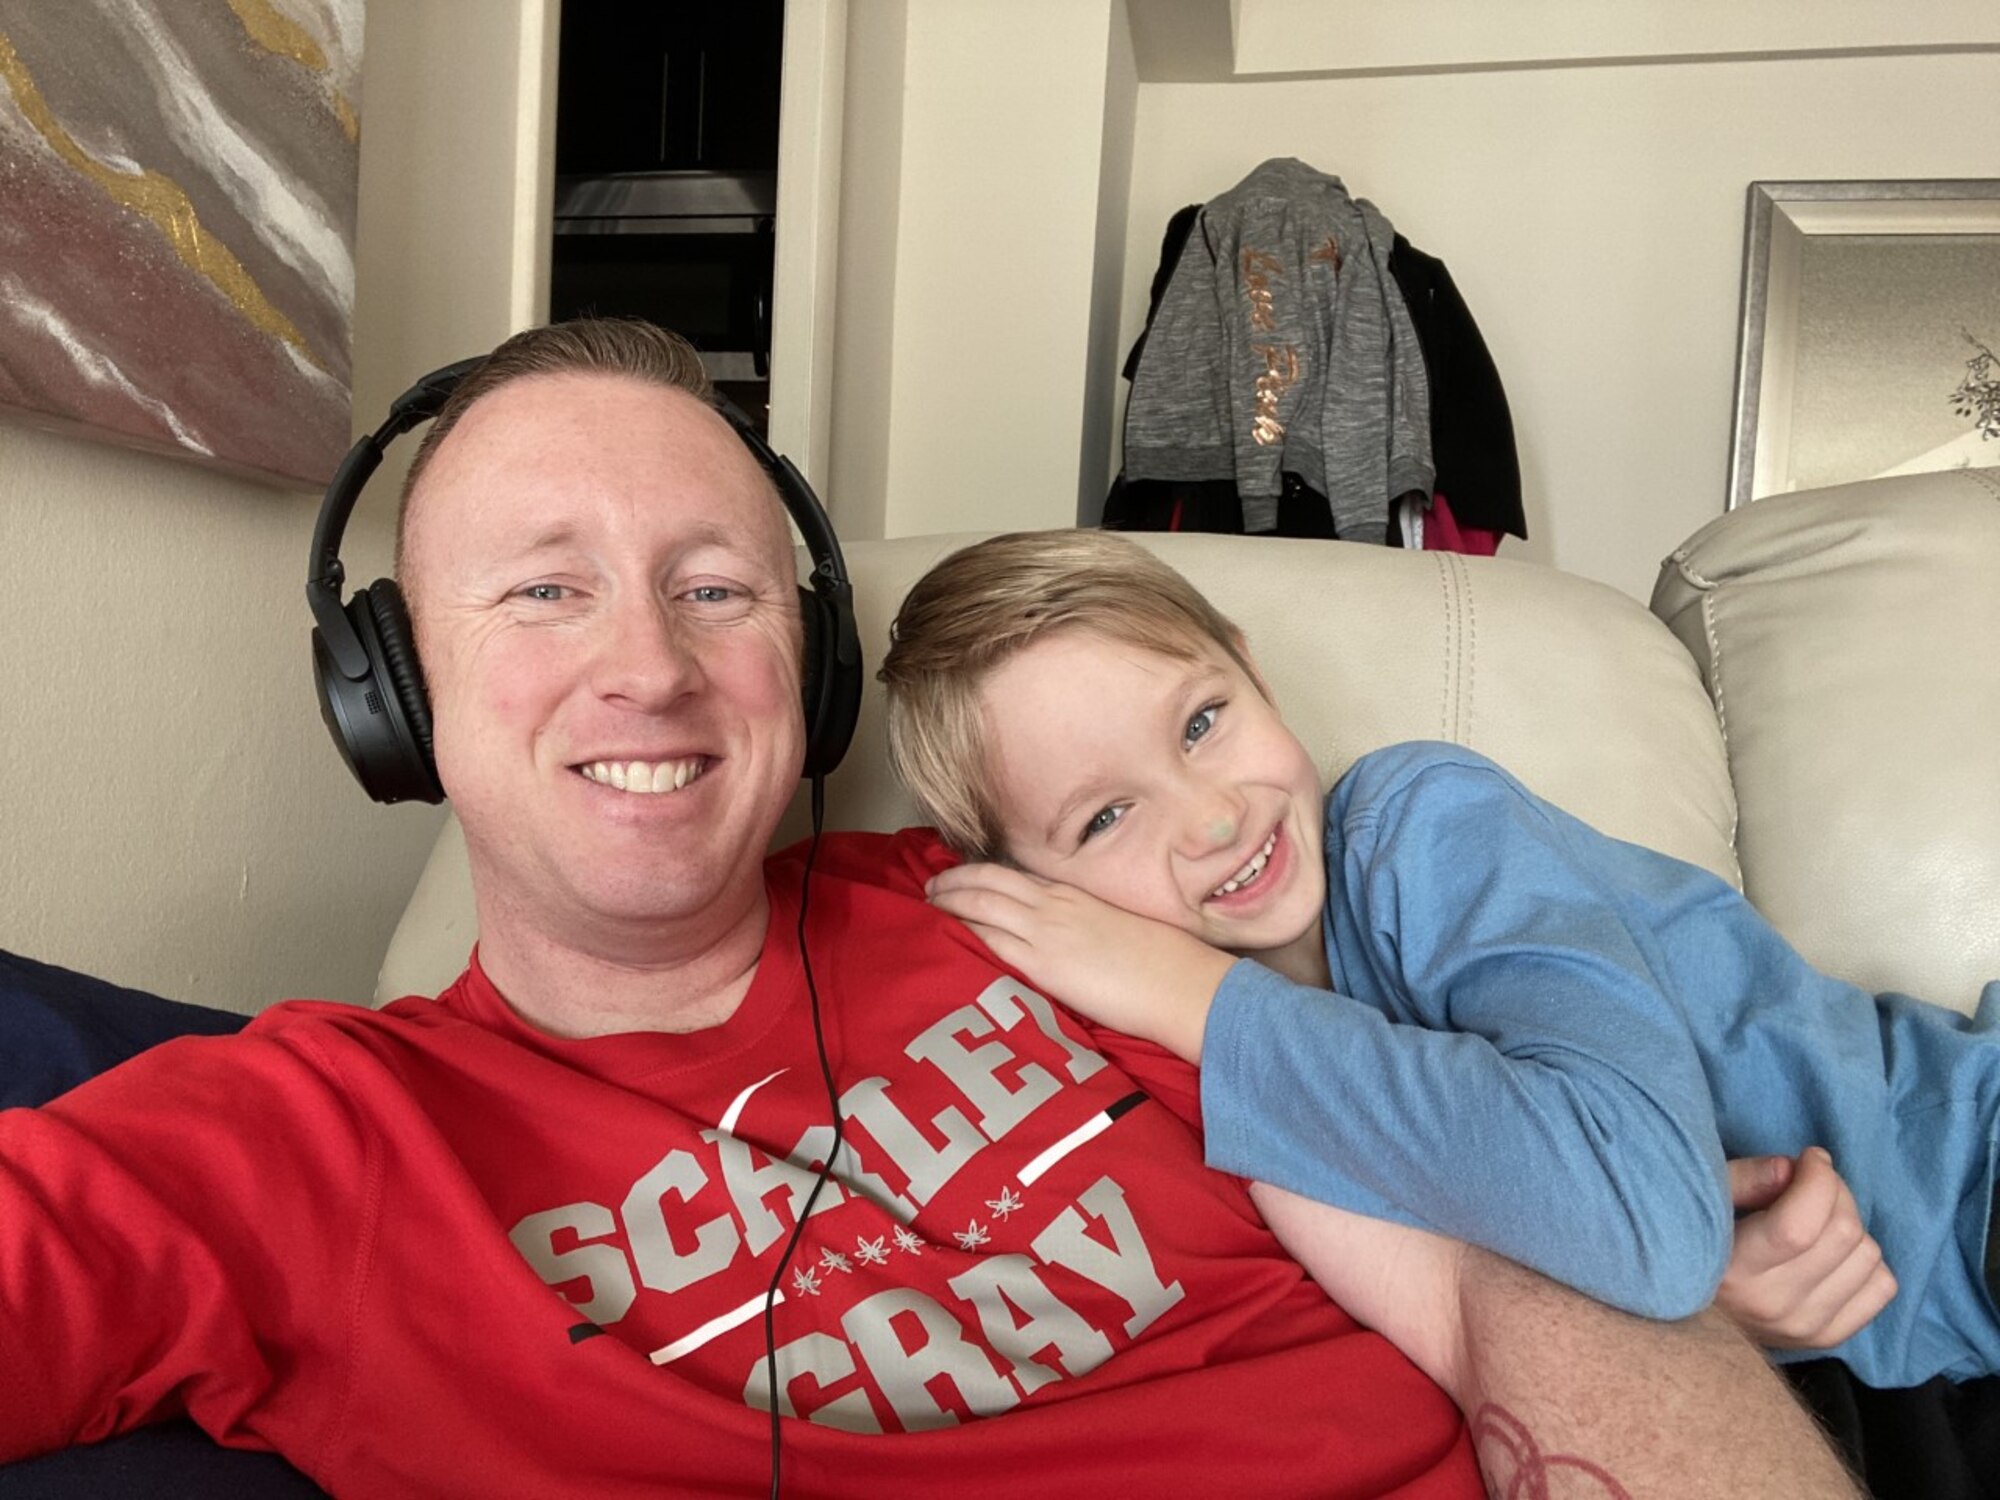 As teleworking becomes the norm for many military members, an Airman from the 321st Contingency Response Squadron is learning how to cope with support from his family.